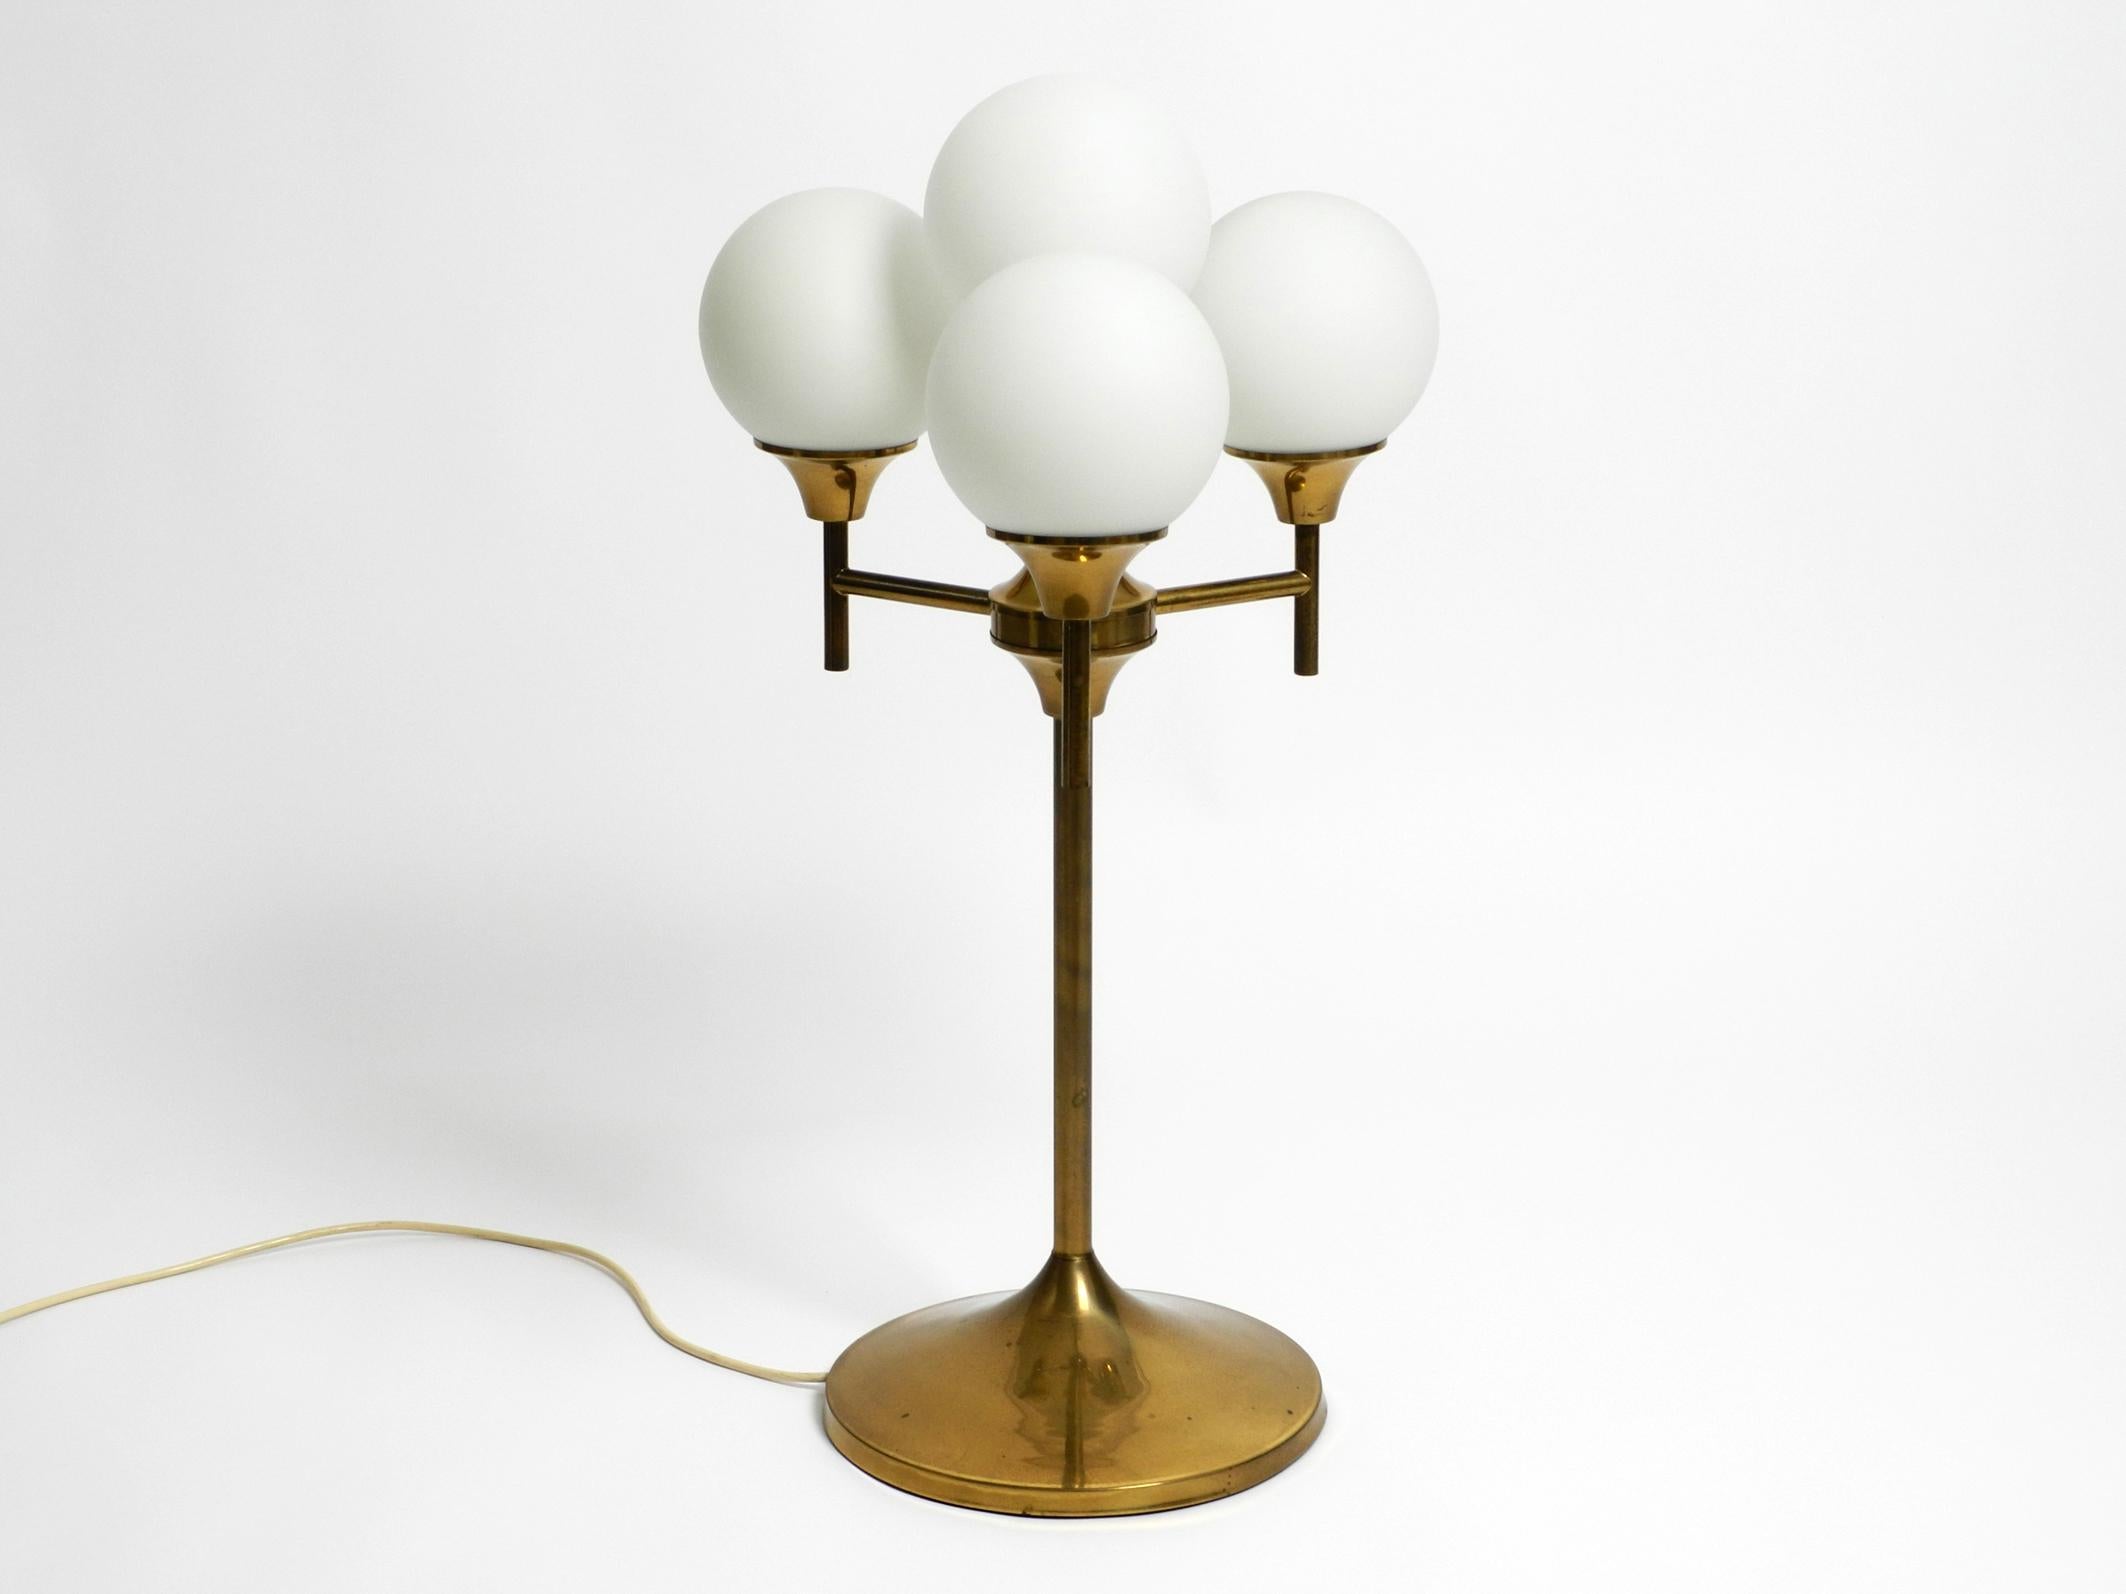 Extraordinary beautiful large 1960s heavy brass table or floor lamp.
Manufacturer is Kaiser Leuchten. Made in Germany.
Lampshades are made of 4 white frosted glass spheres. Makes a very nice soft light.
Great Mid Century Space Age design with many